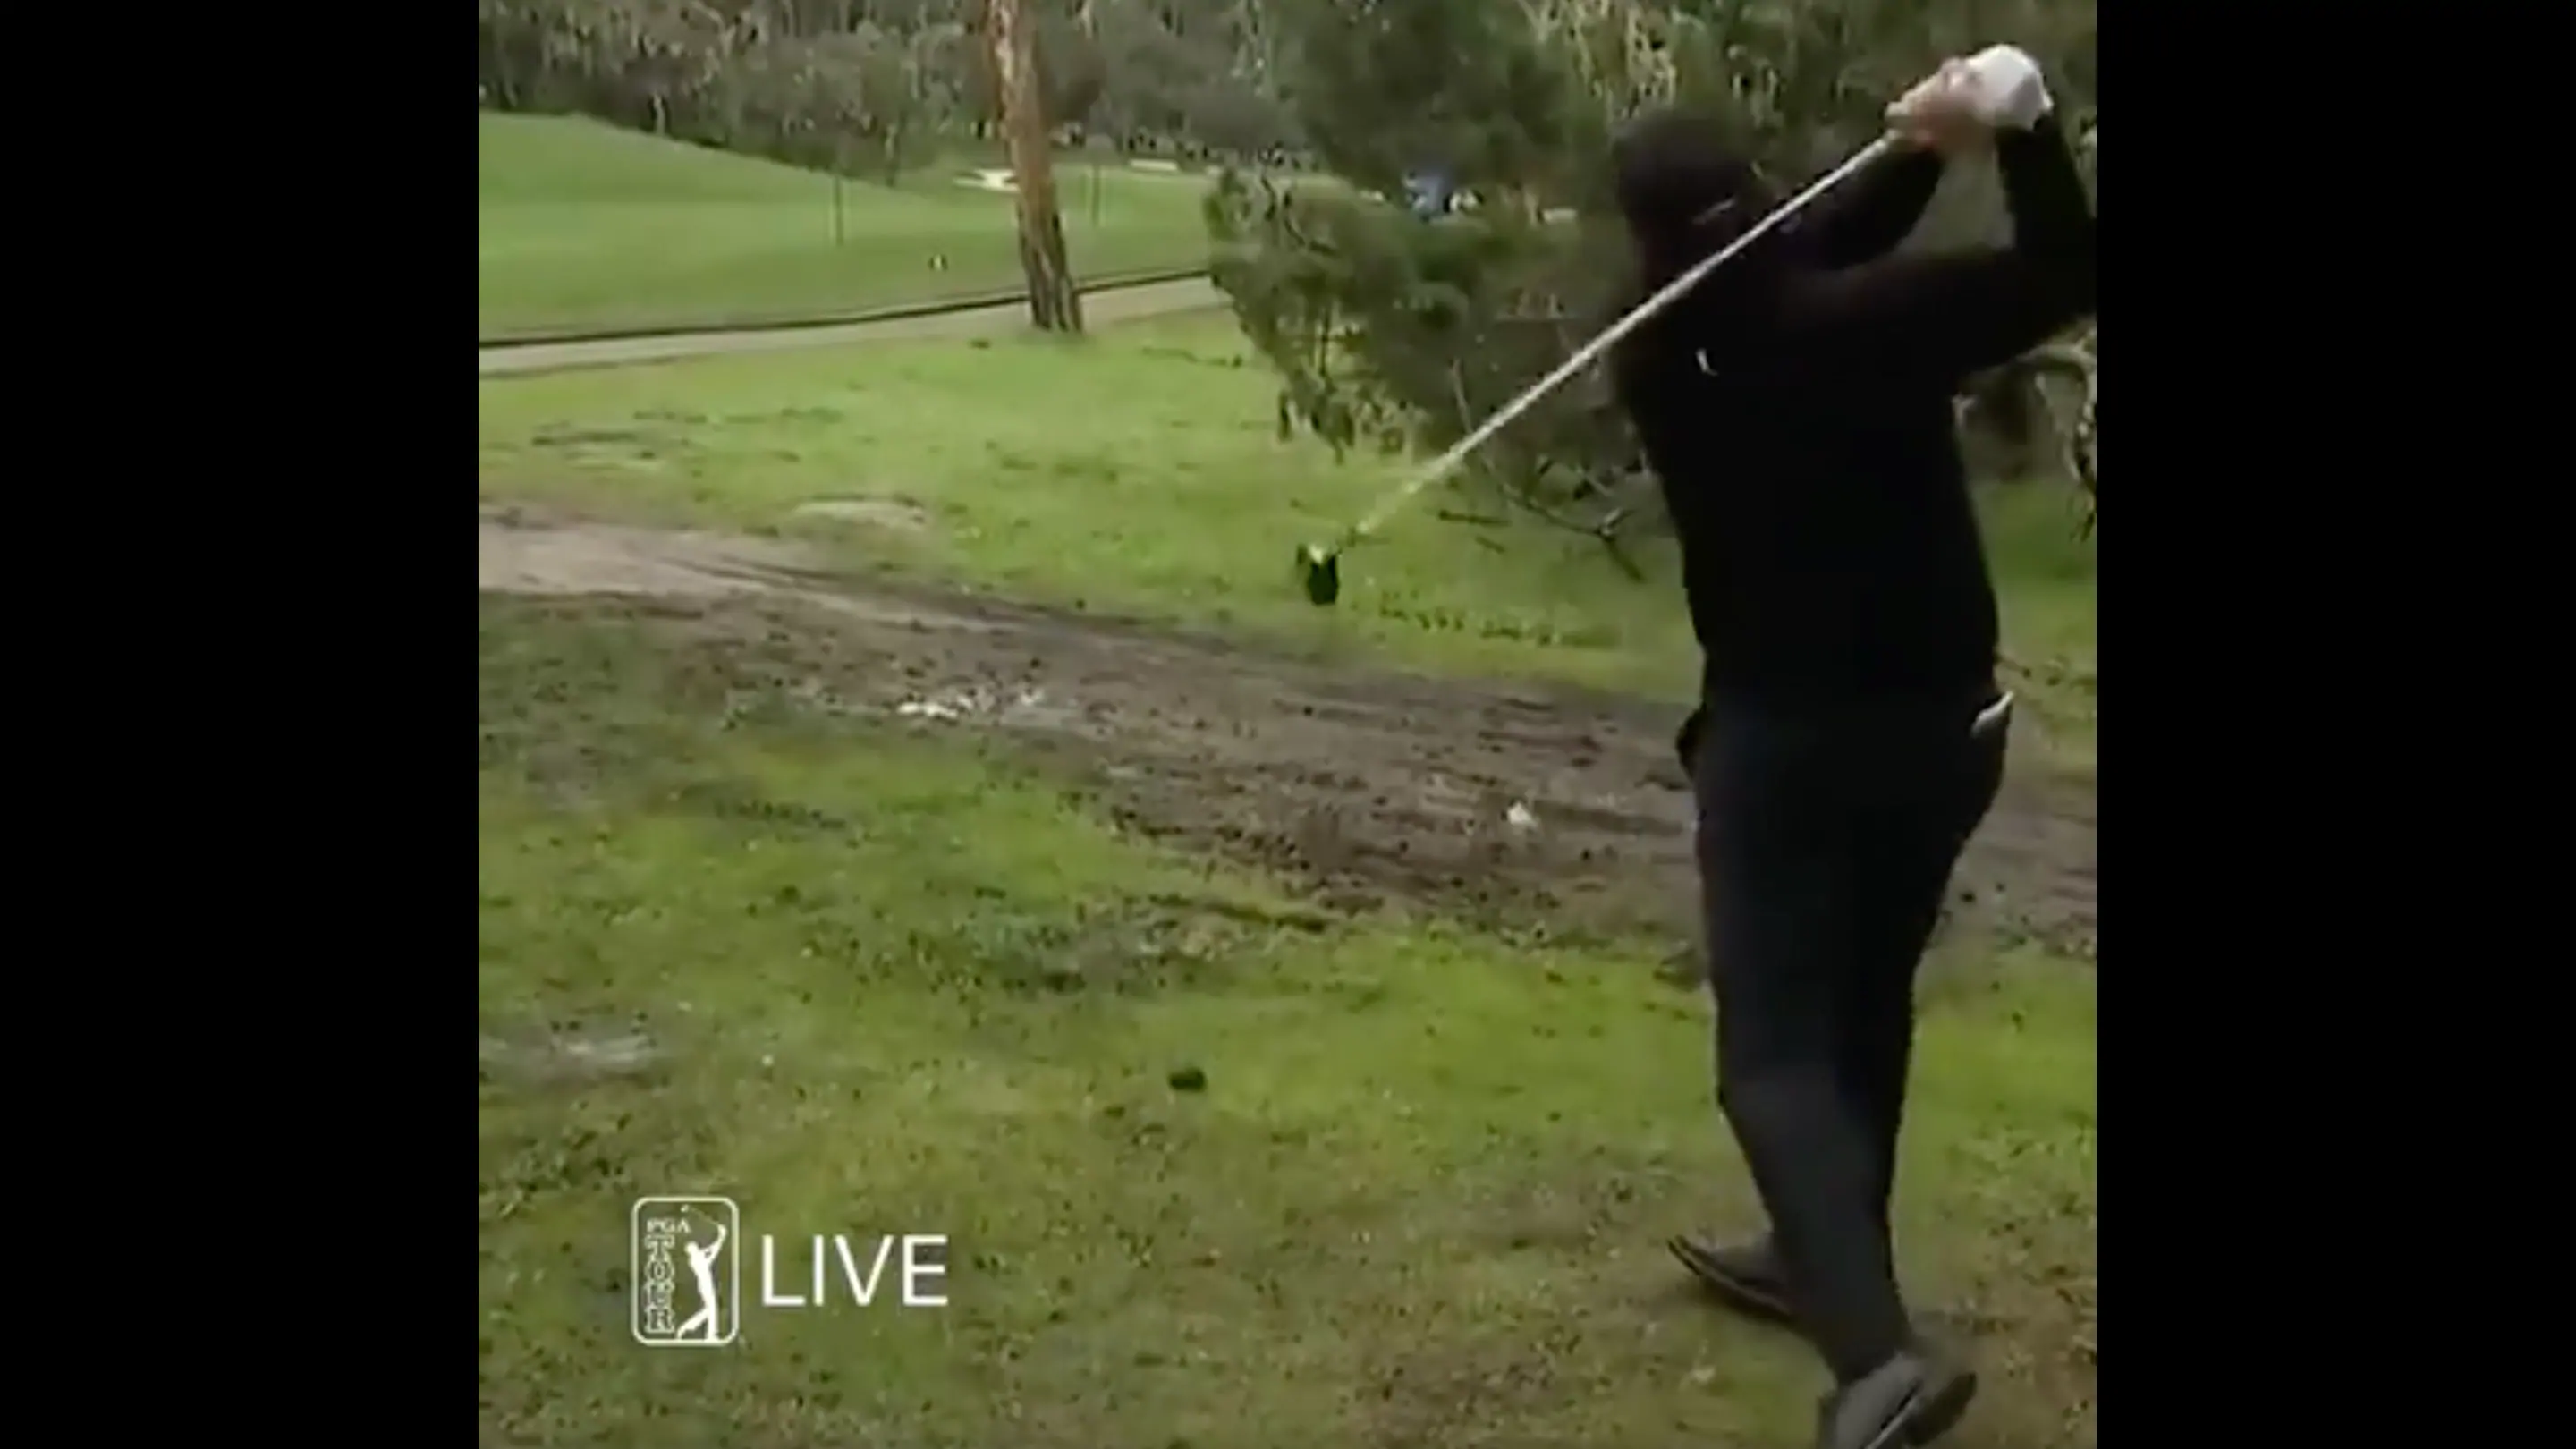 Classic Phil: Hits through trees, over water, makes birdie